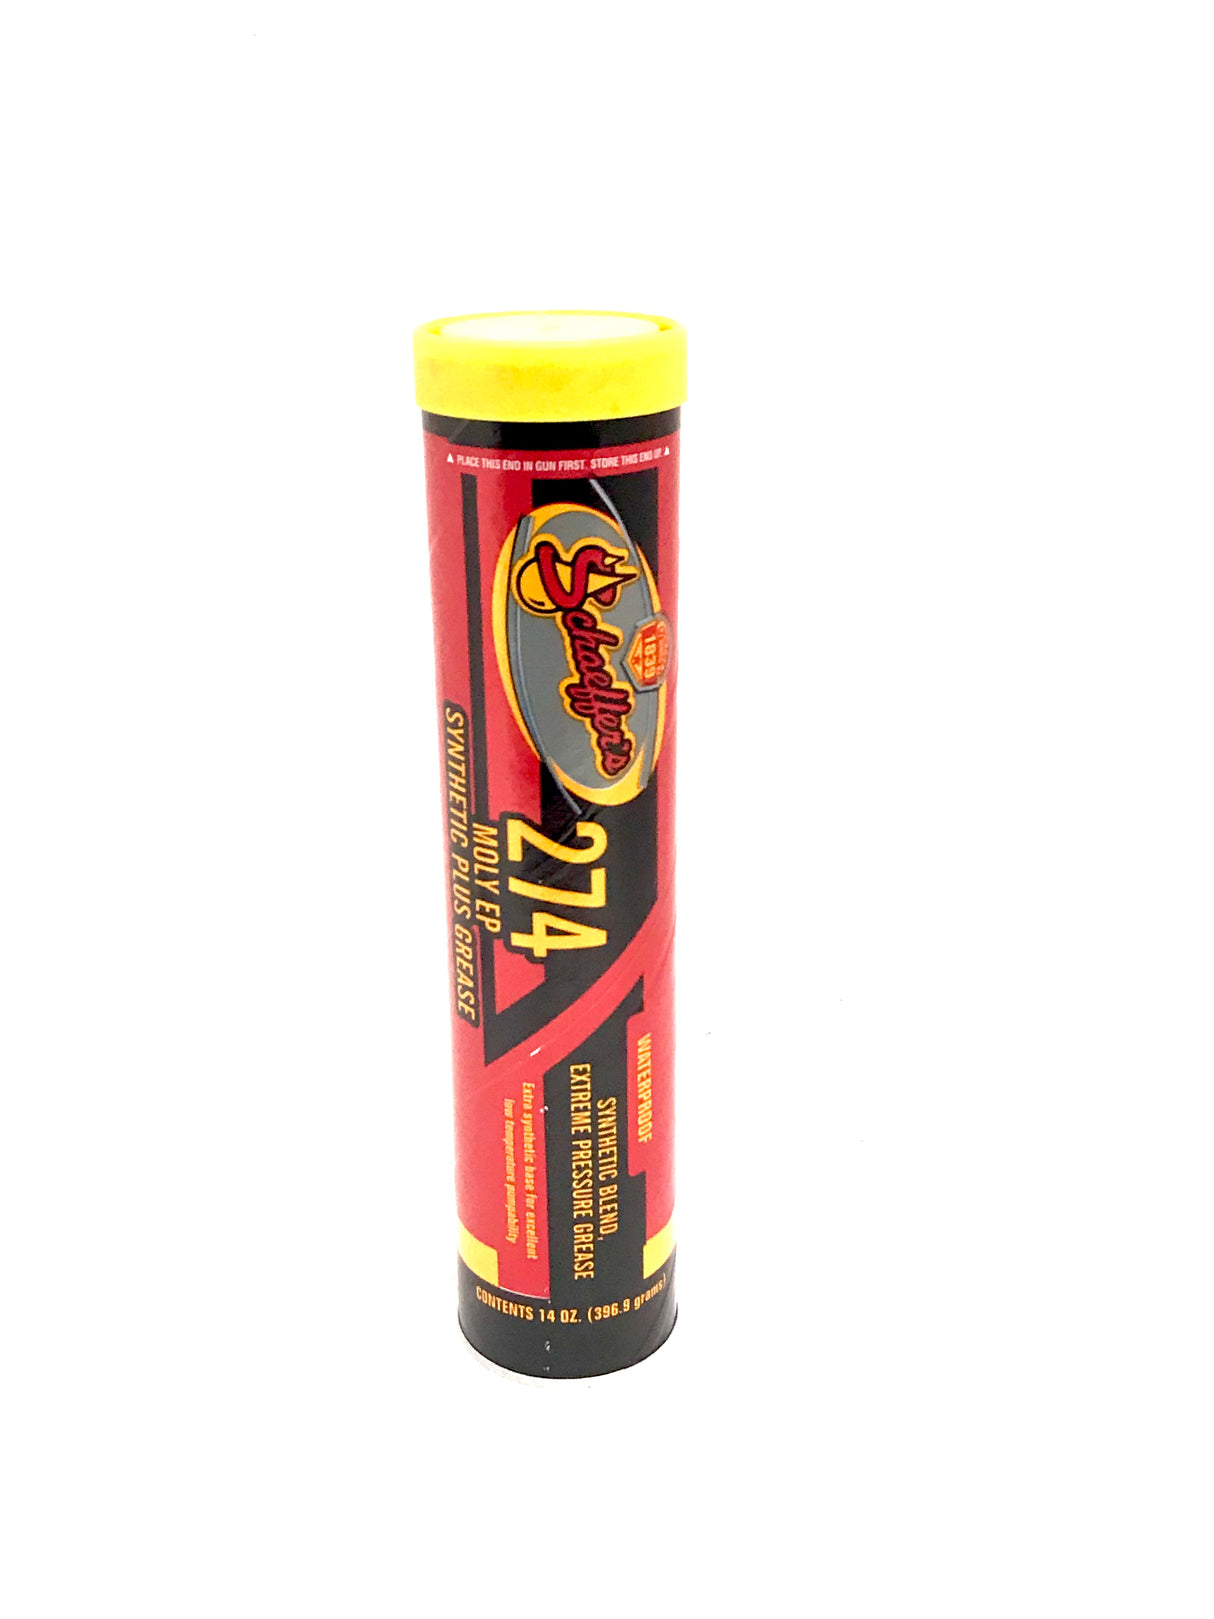 Schaeffer's 274 Moly EP Synthetic Plus Waterproof Grease - 14 oz tube